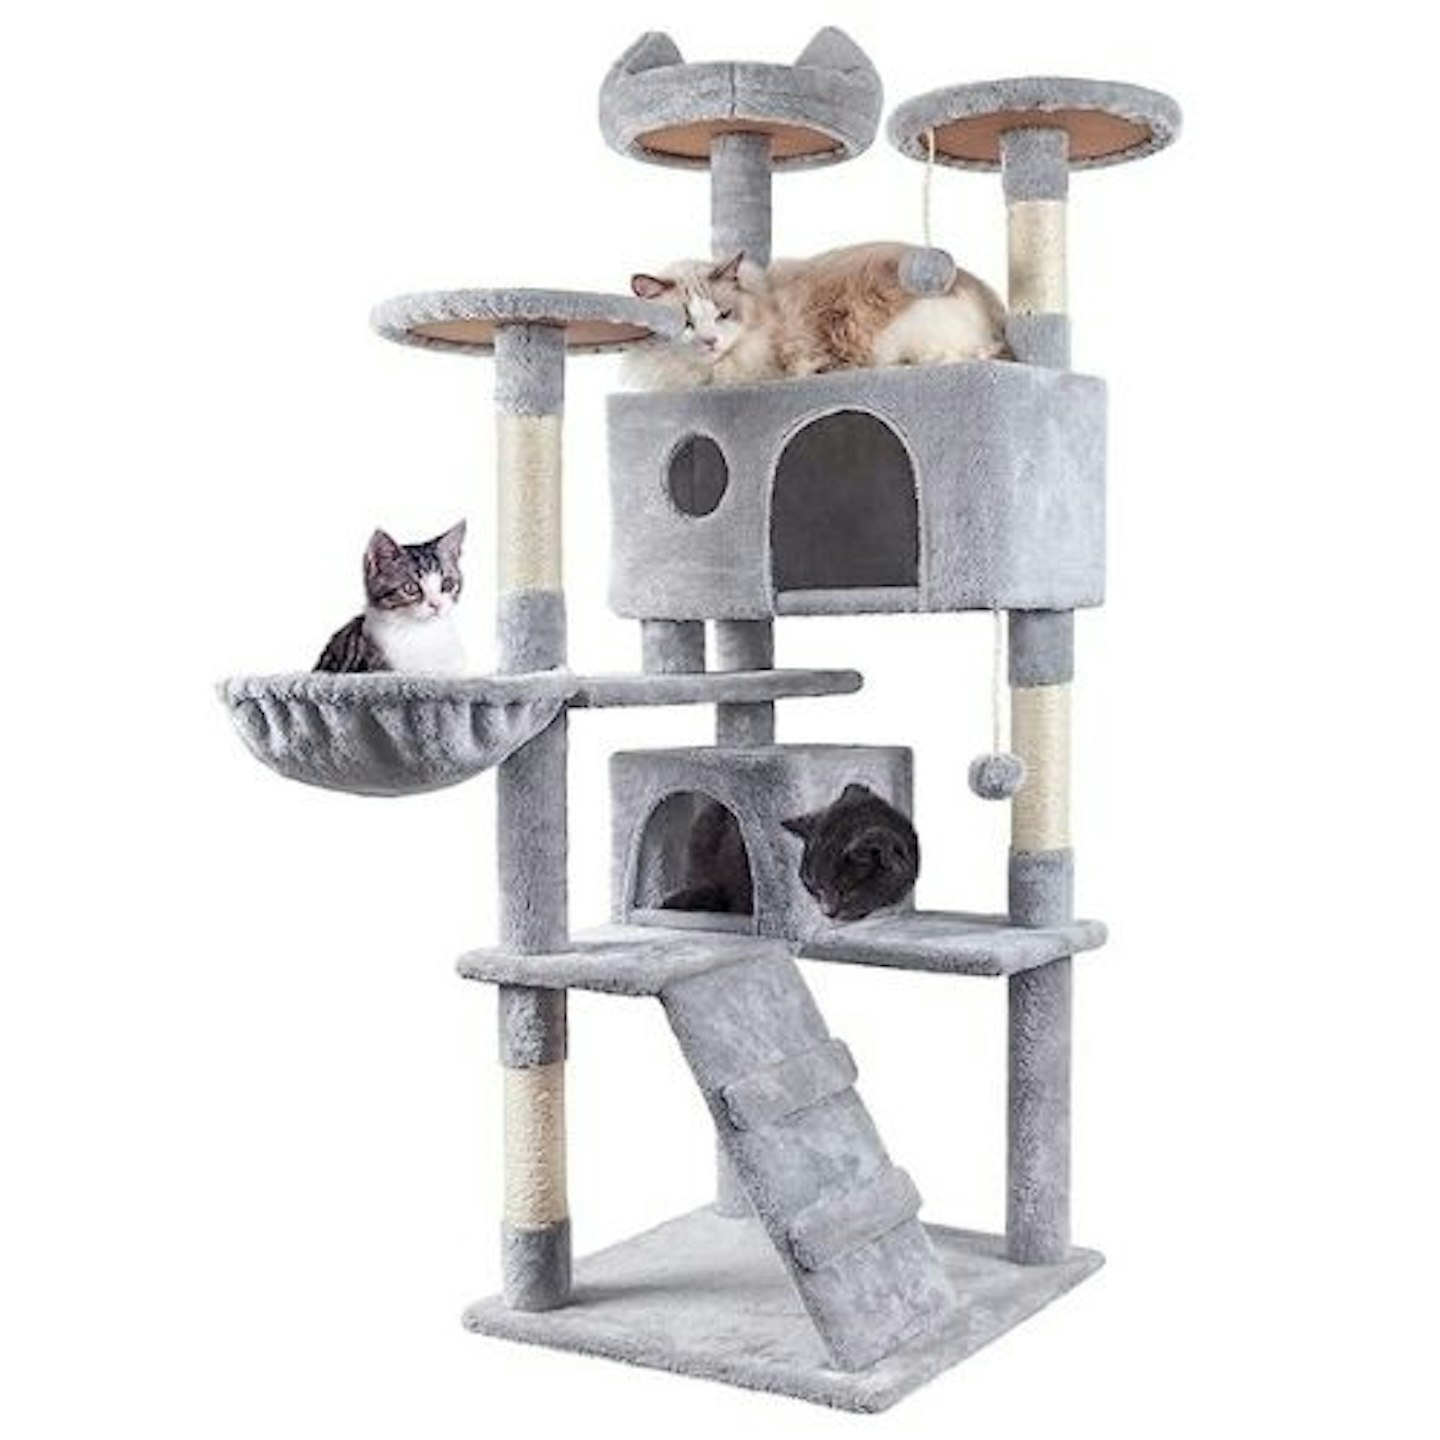 HOMIDEC Cat Tree, 151cm Scratching Post Stable Tower